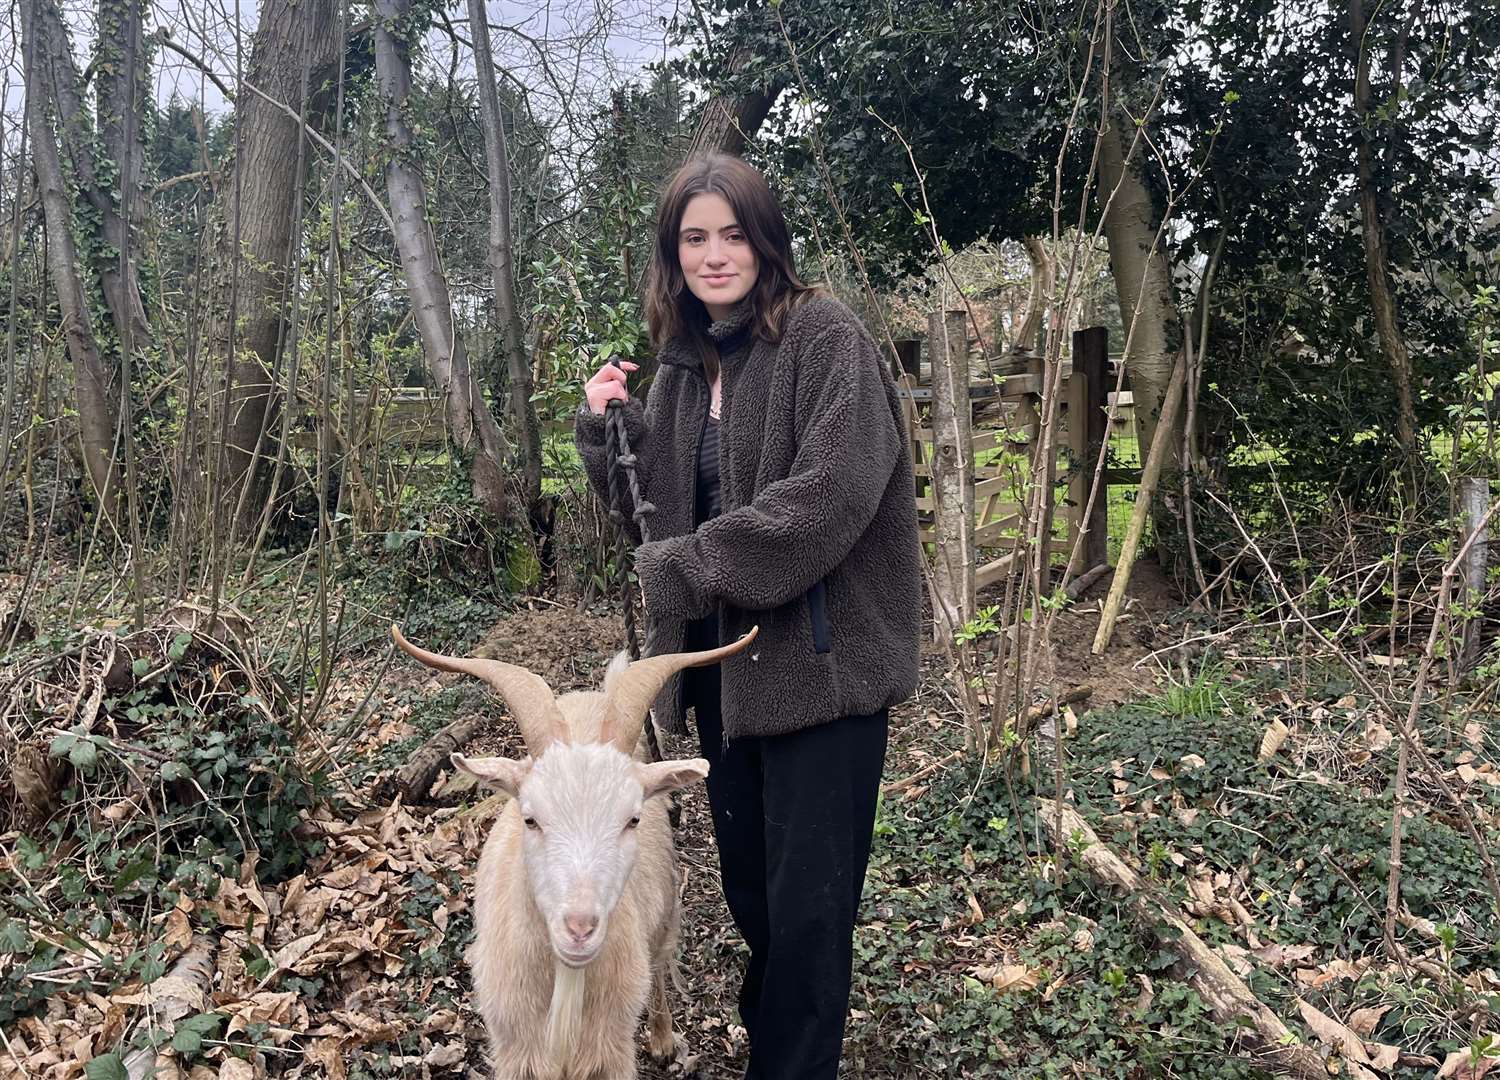 KentOnline reporter Charlotte Phillips with goat Ross at Buttercups Sanctuary for Goats in Boughton Monchelsea